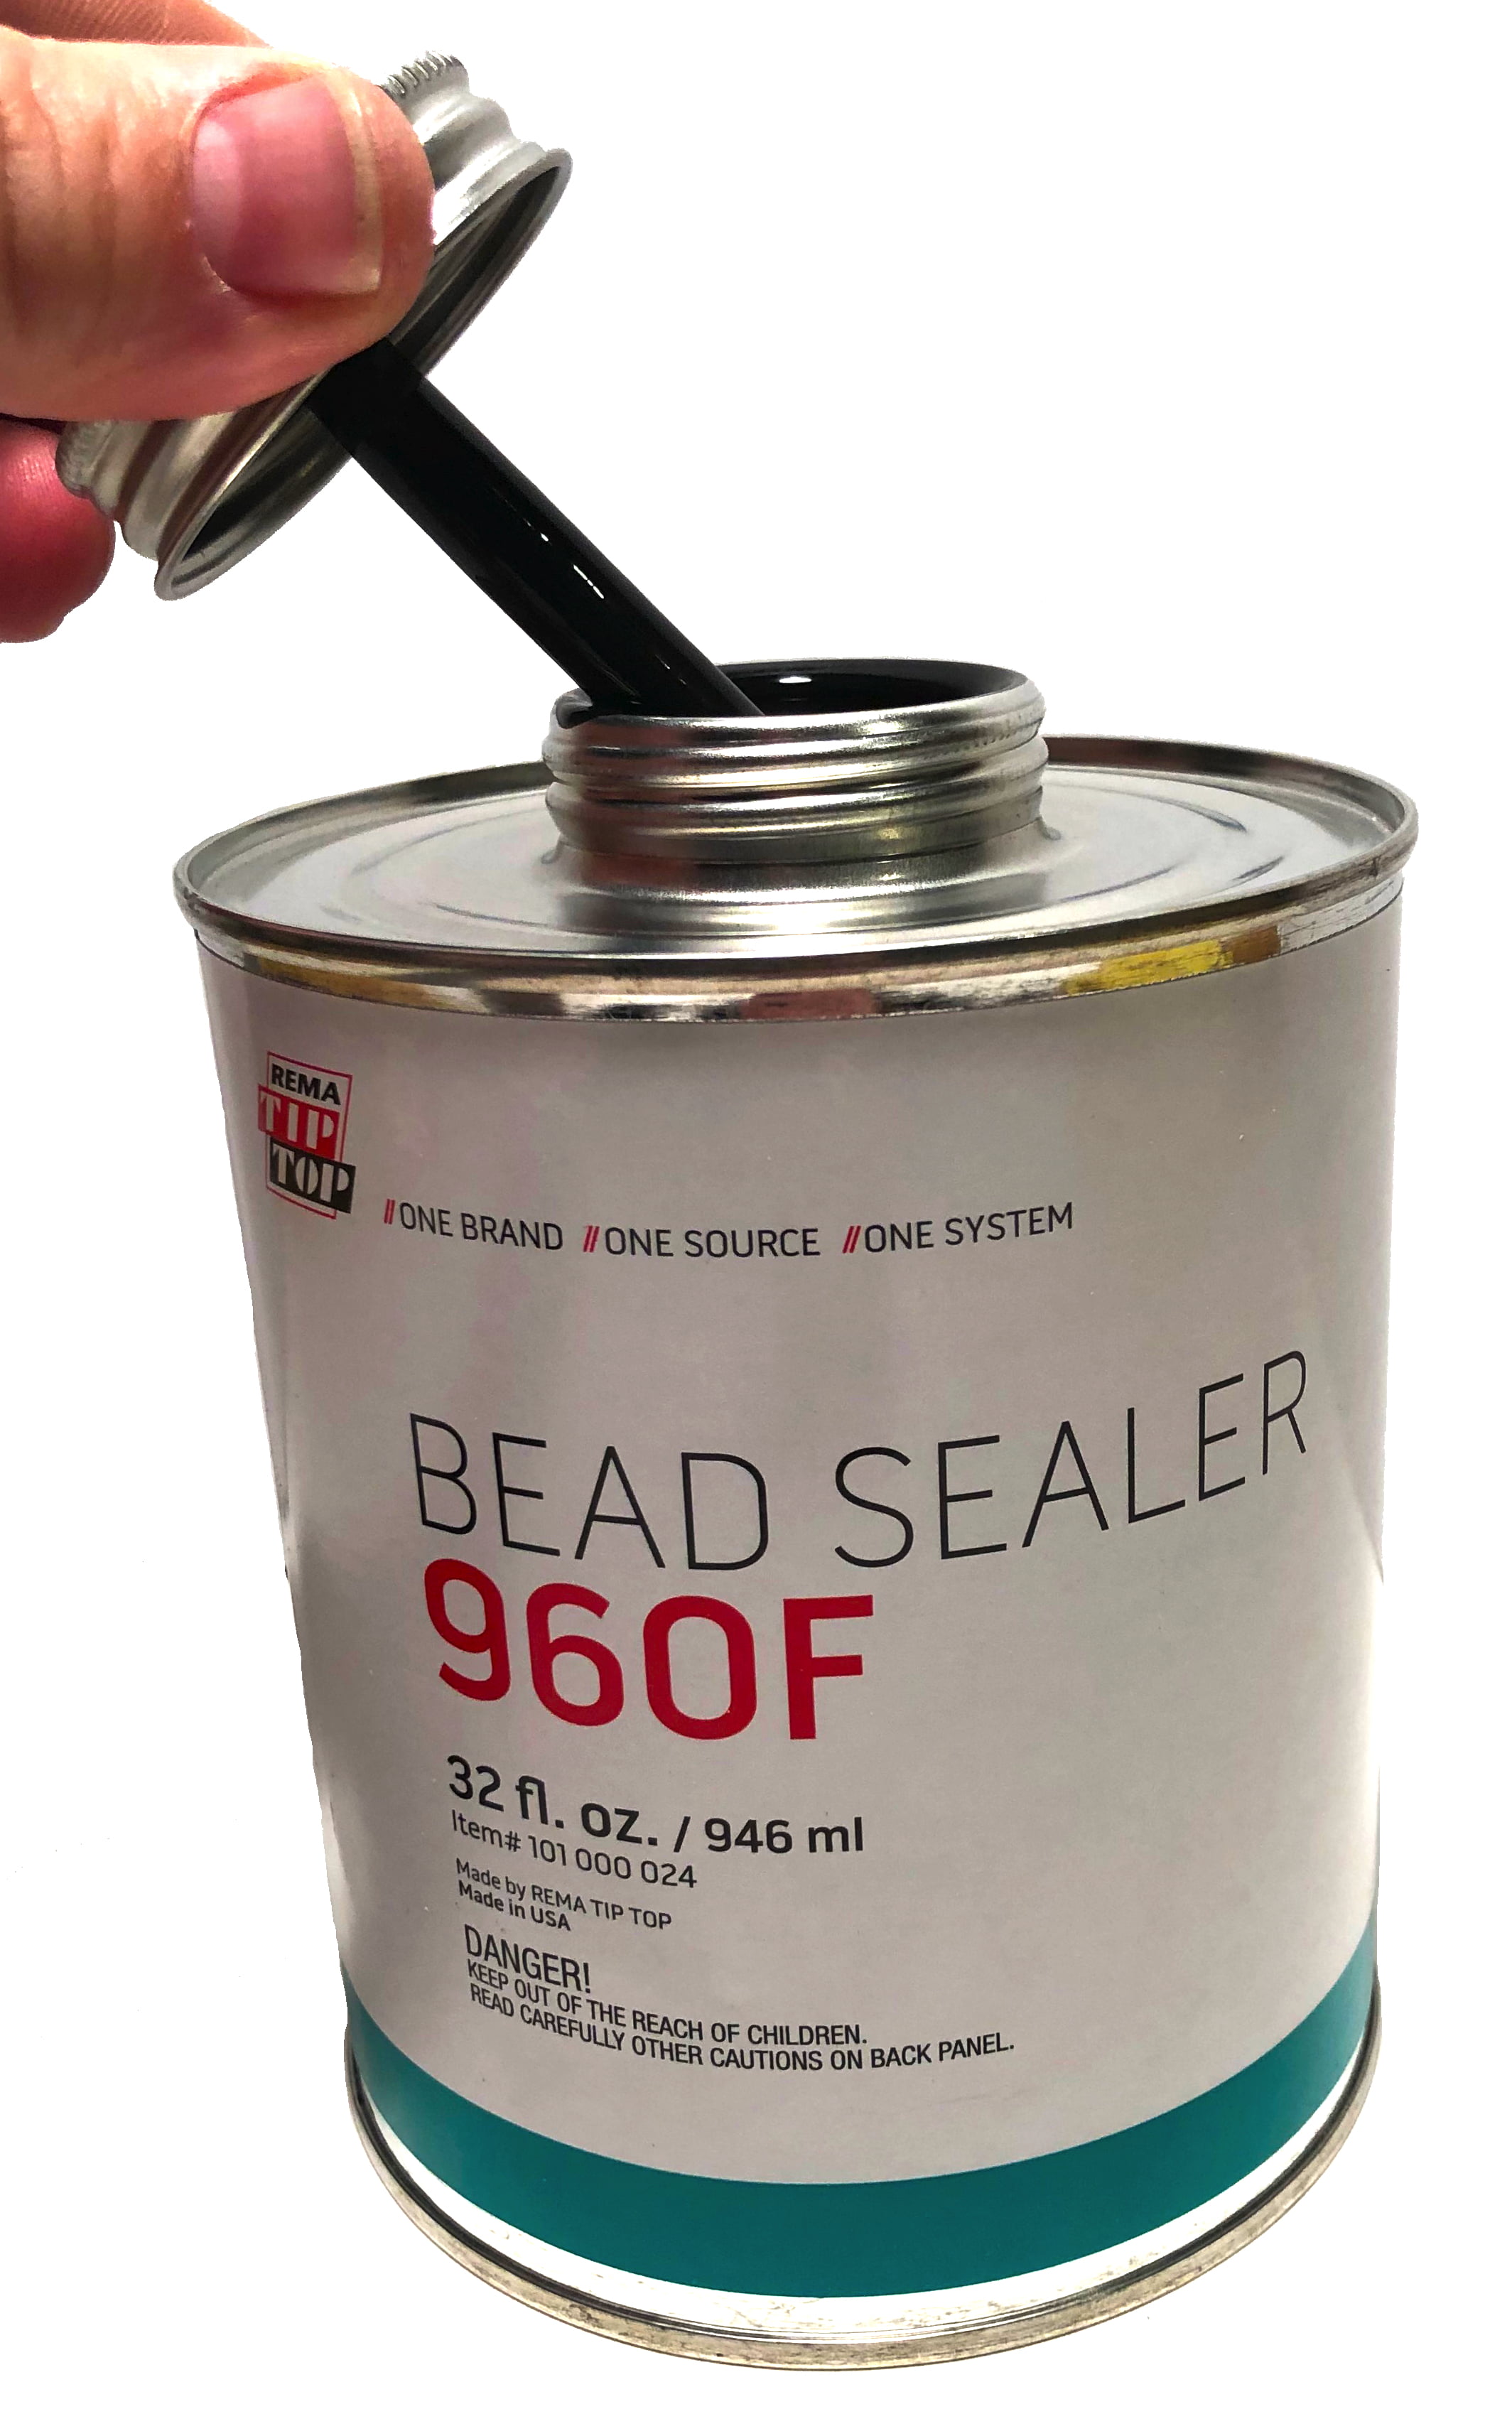 Two cans of REMA 960F Tire Bead Sealer, Rim Sealer 32 fl oz can - Brush Top  